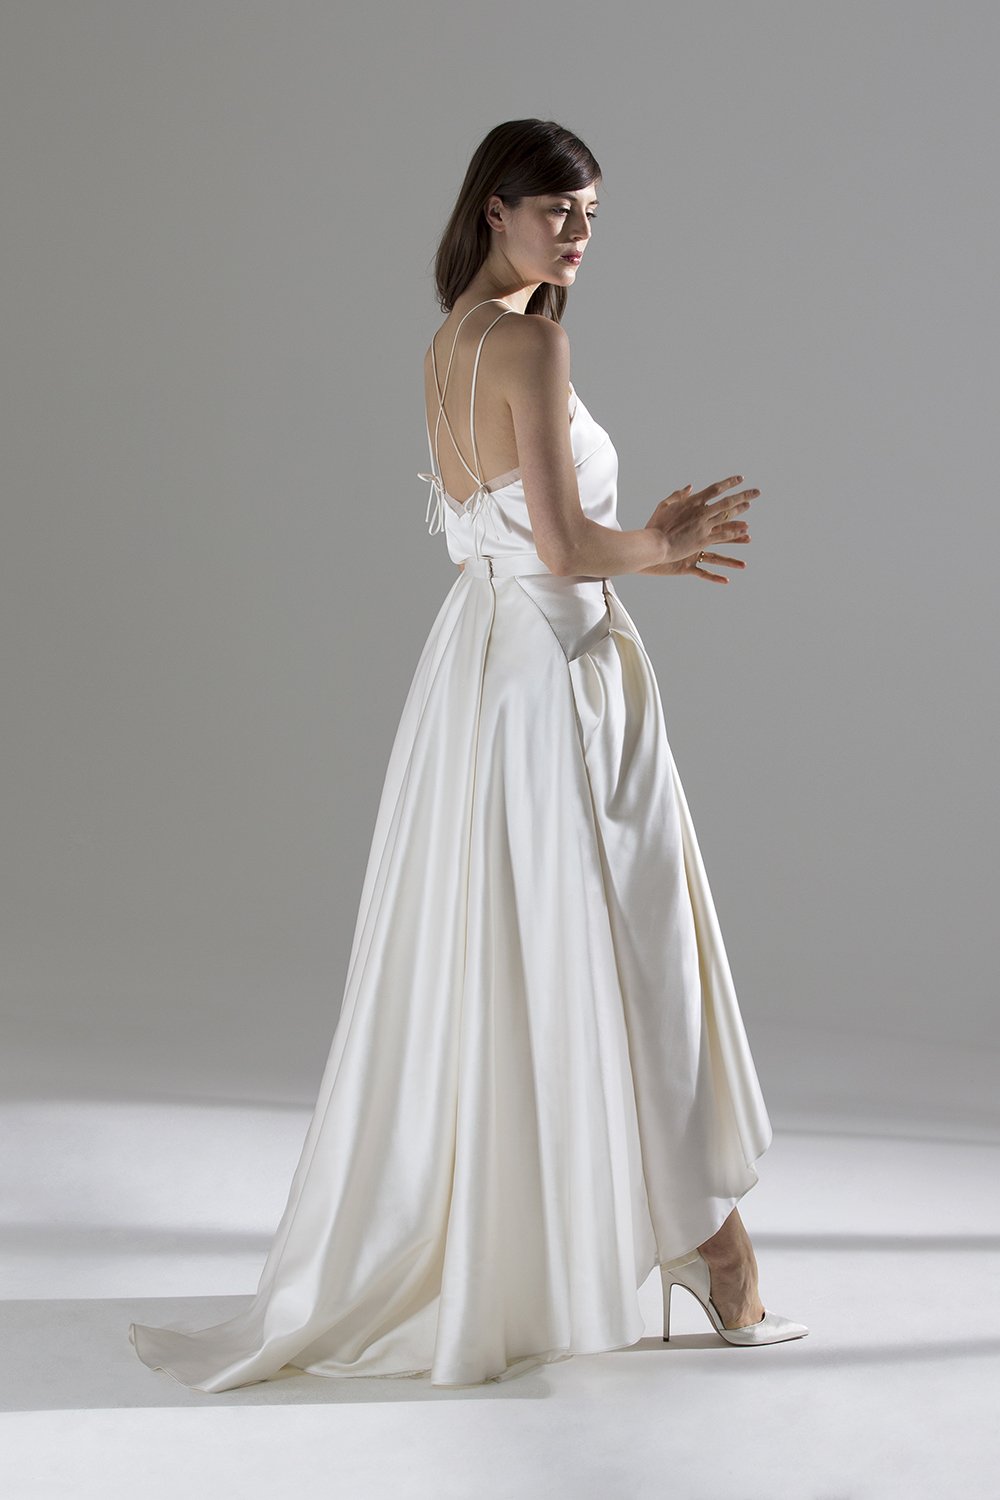 Net-A-Porter drop I — Halfpenny London Wedding dresses and separates in ...